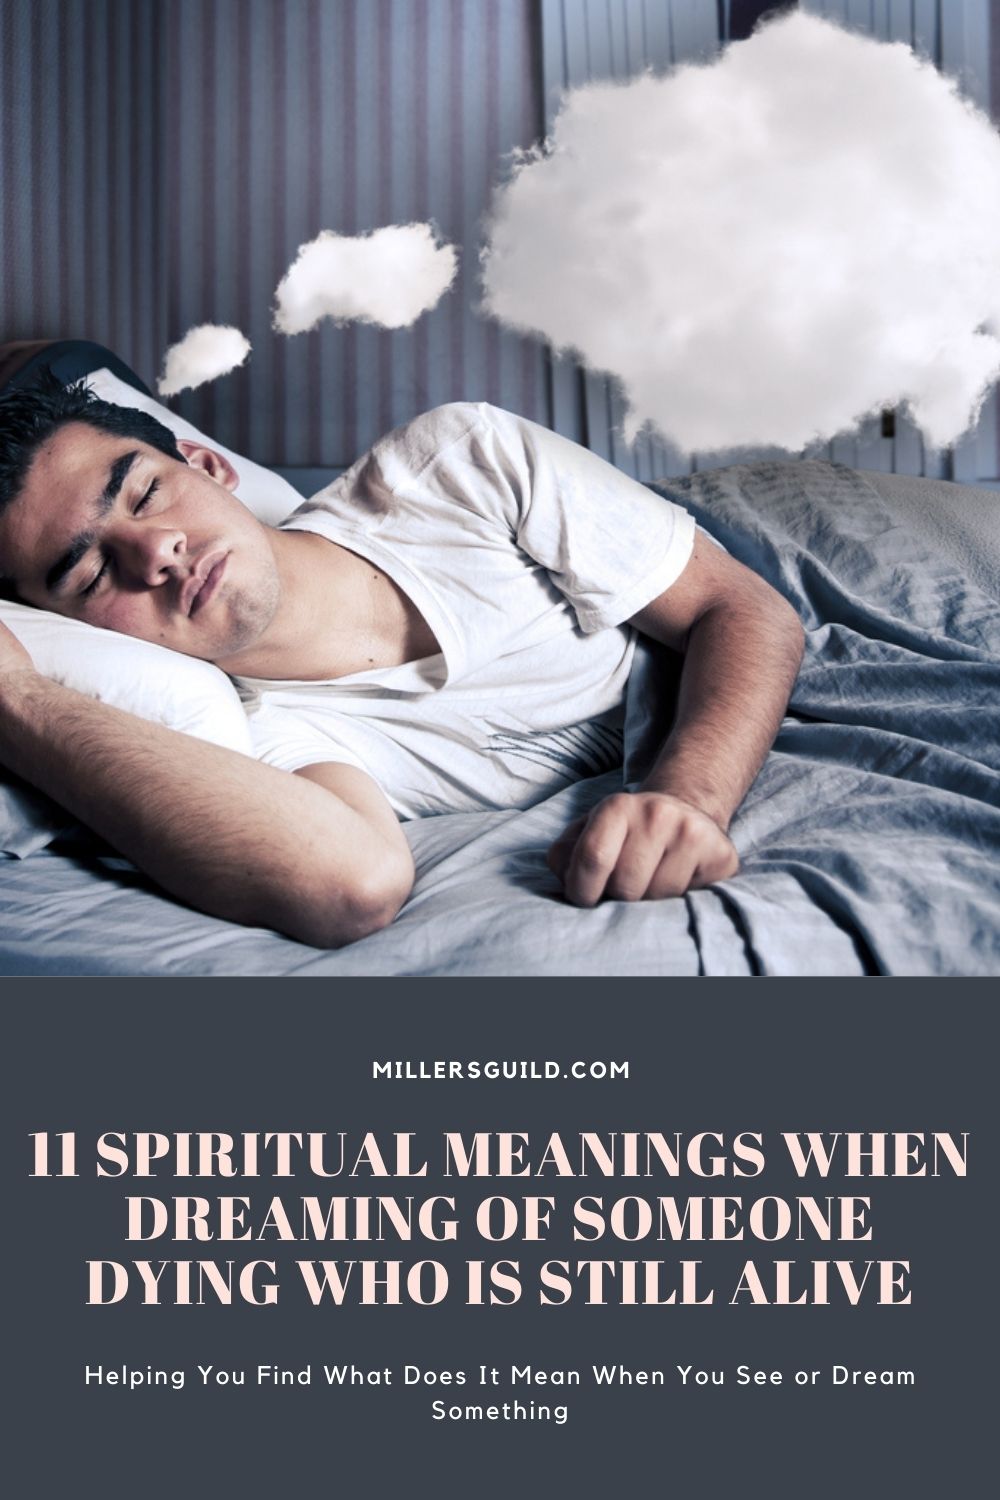 11 Spiritual Meanings When Dreaming Of Someone Dying Who Is Still Alive